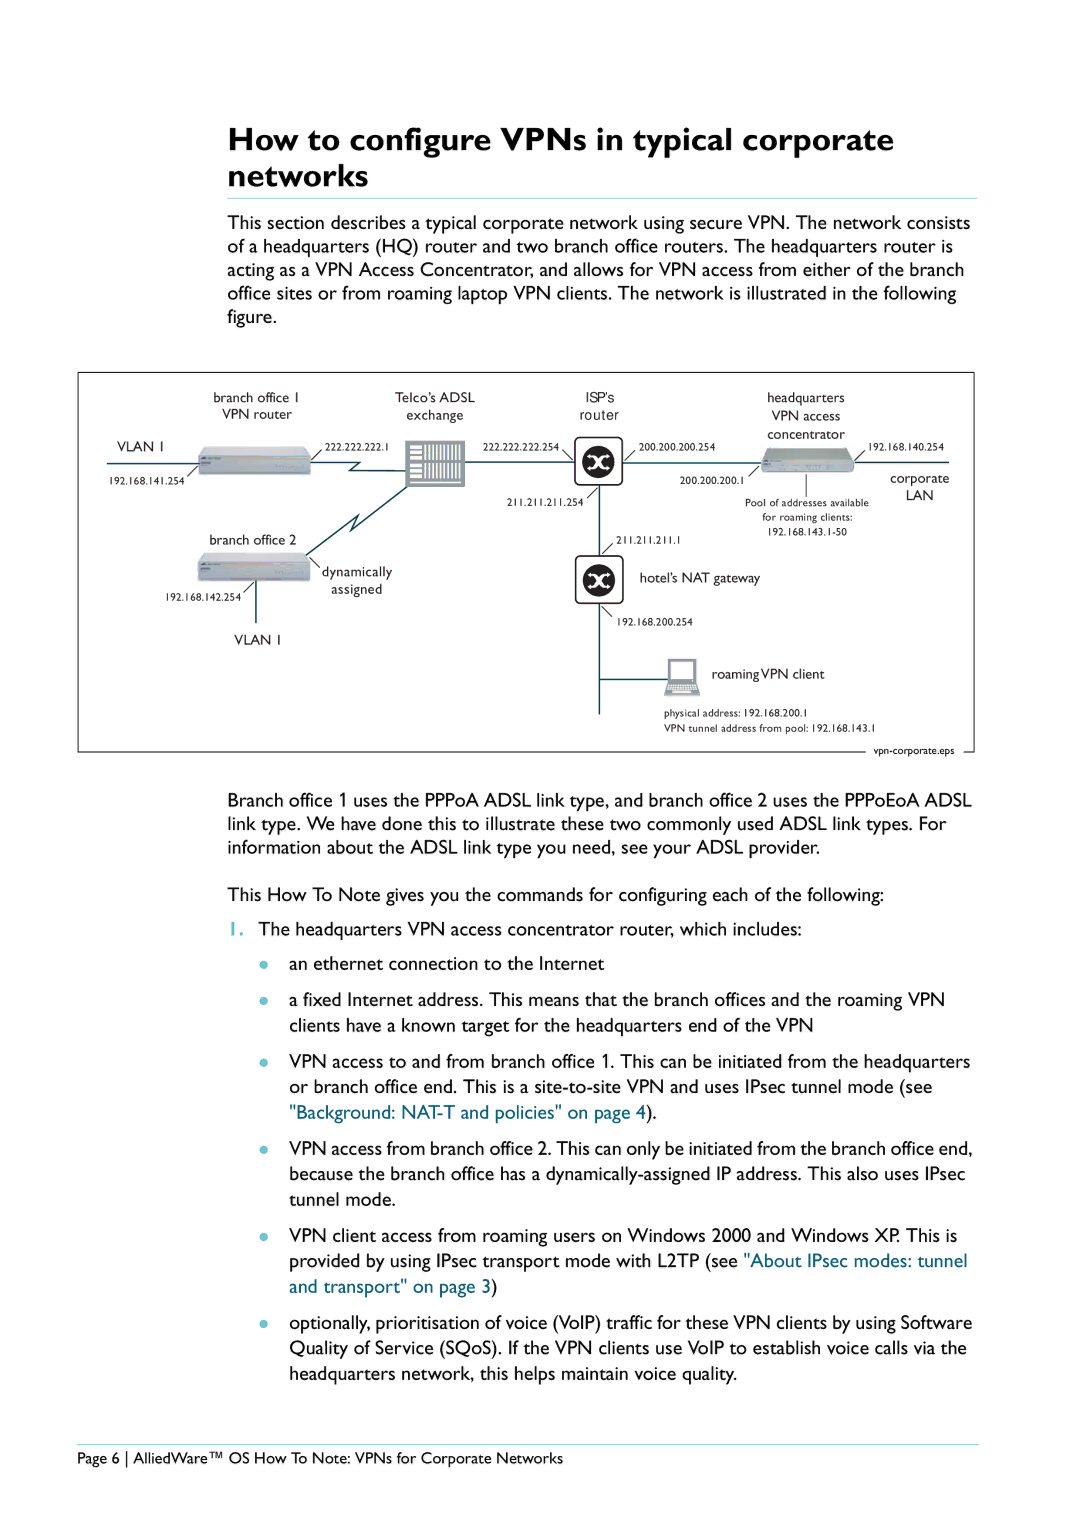 Allied Telesis AR440S manual How to configure VPNs in typical corporate networks, Vlan 